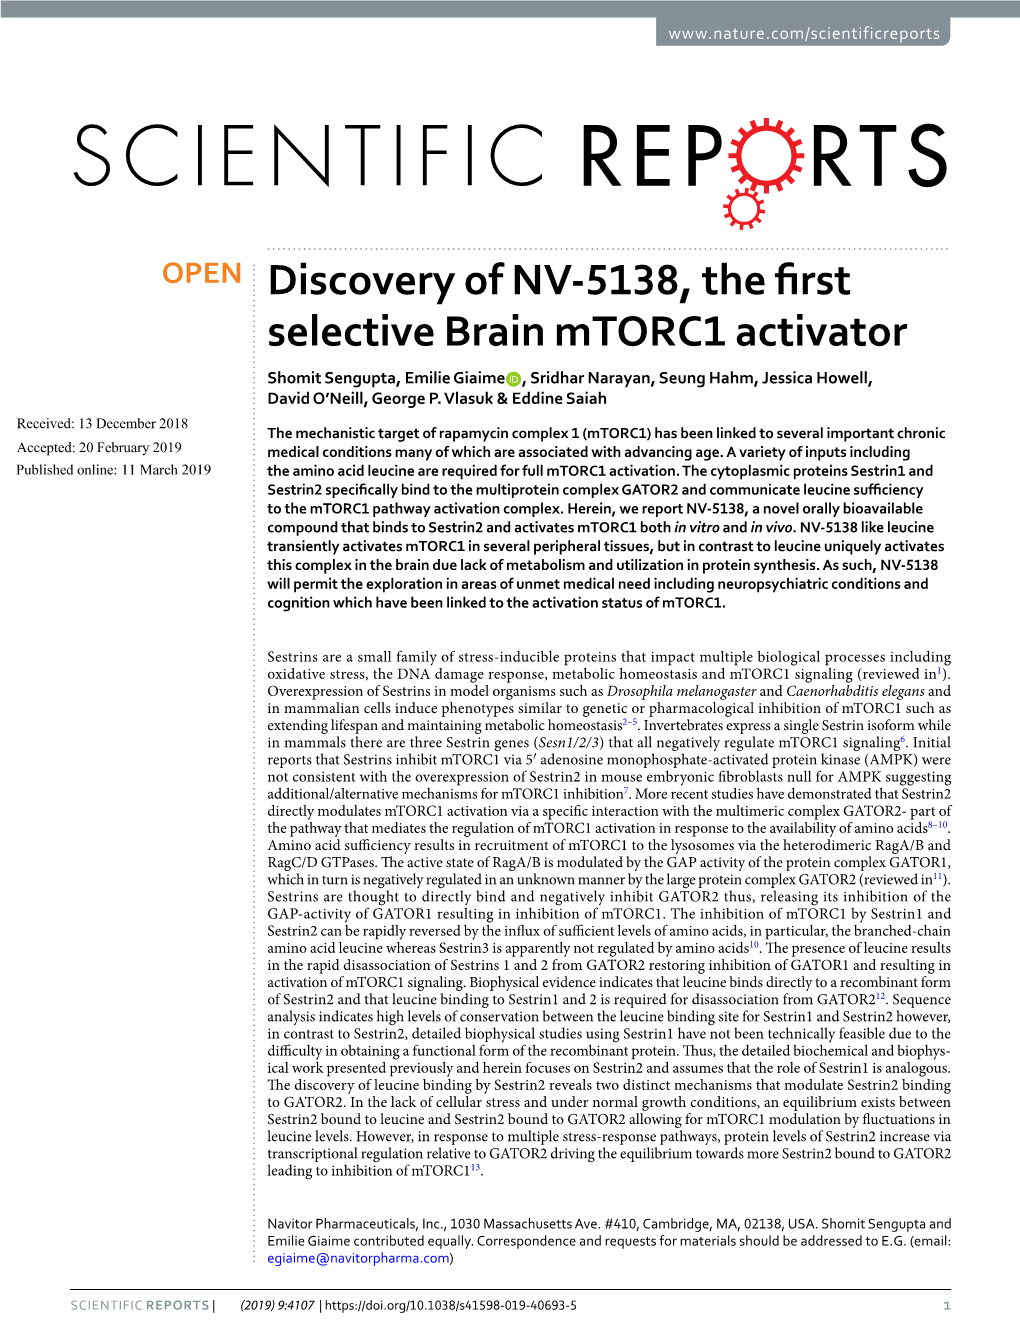 Discovery of NV-5138, the First Selective Brain Mtorc1 Activator